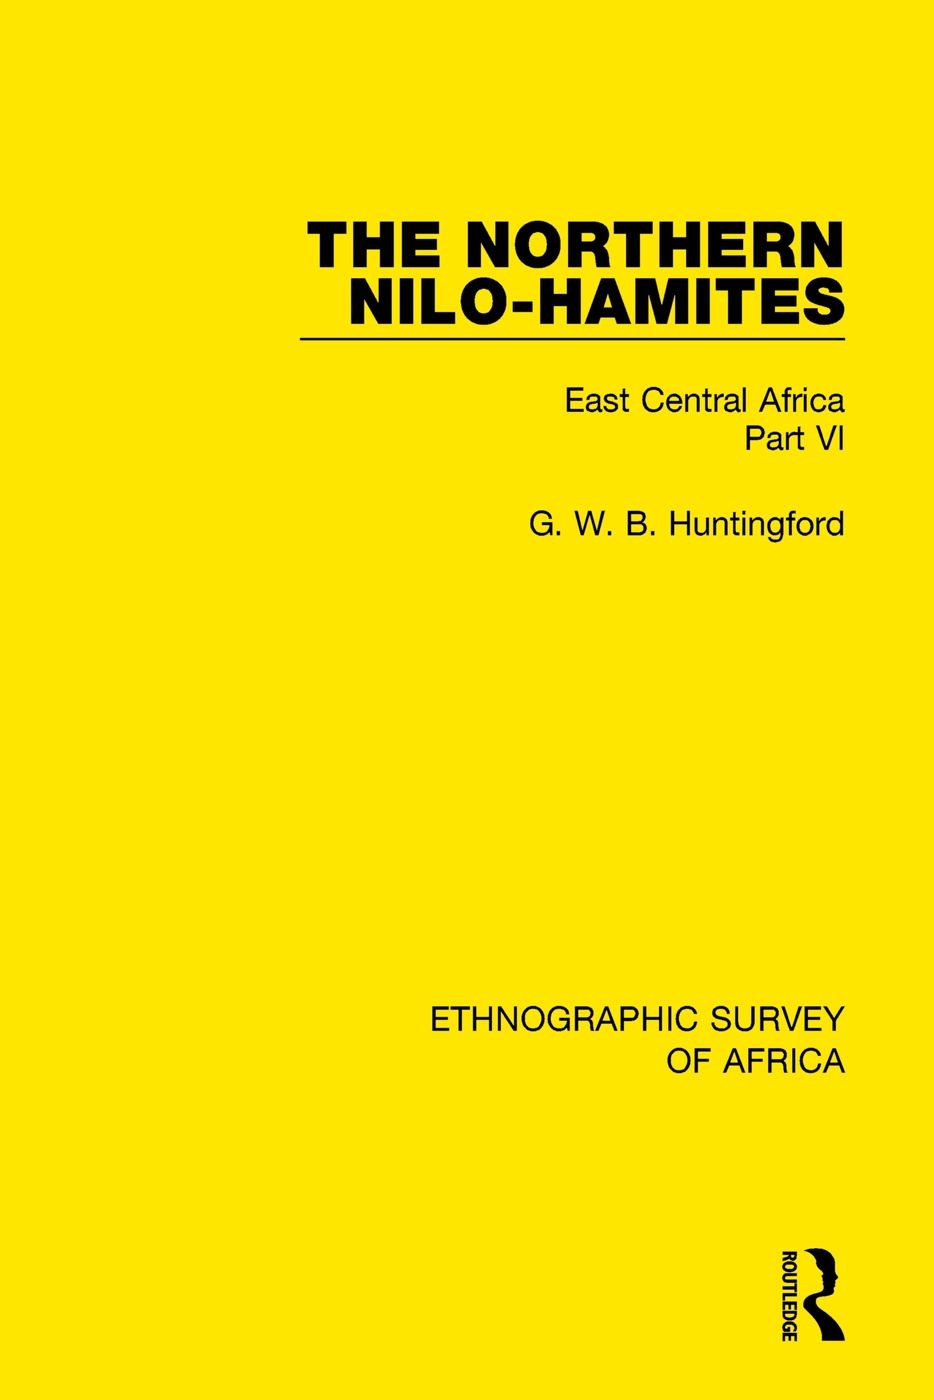 The Northern Nilo-Hamites: East Central Africa Part VI